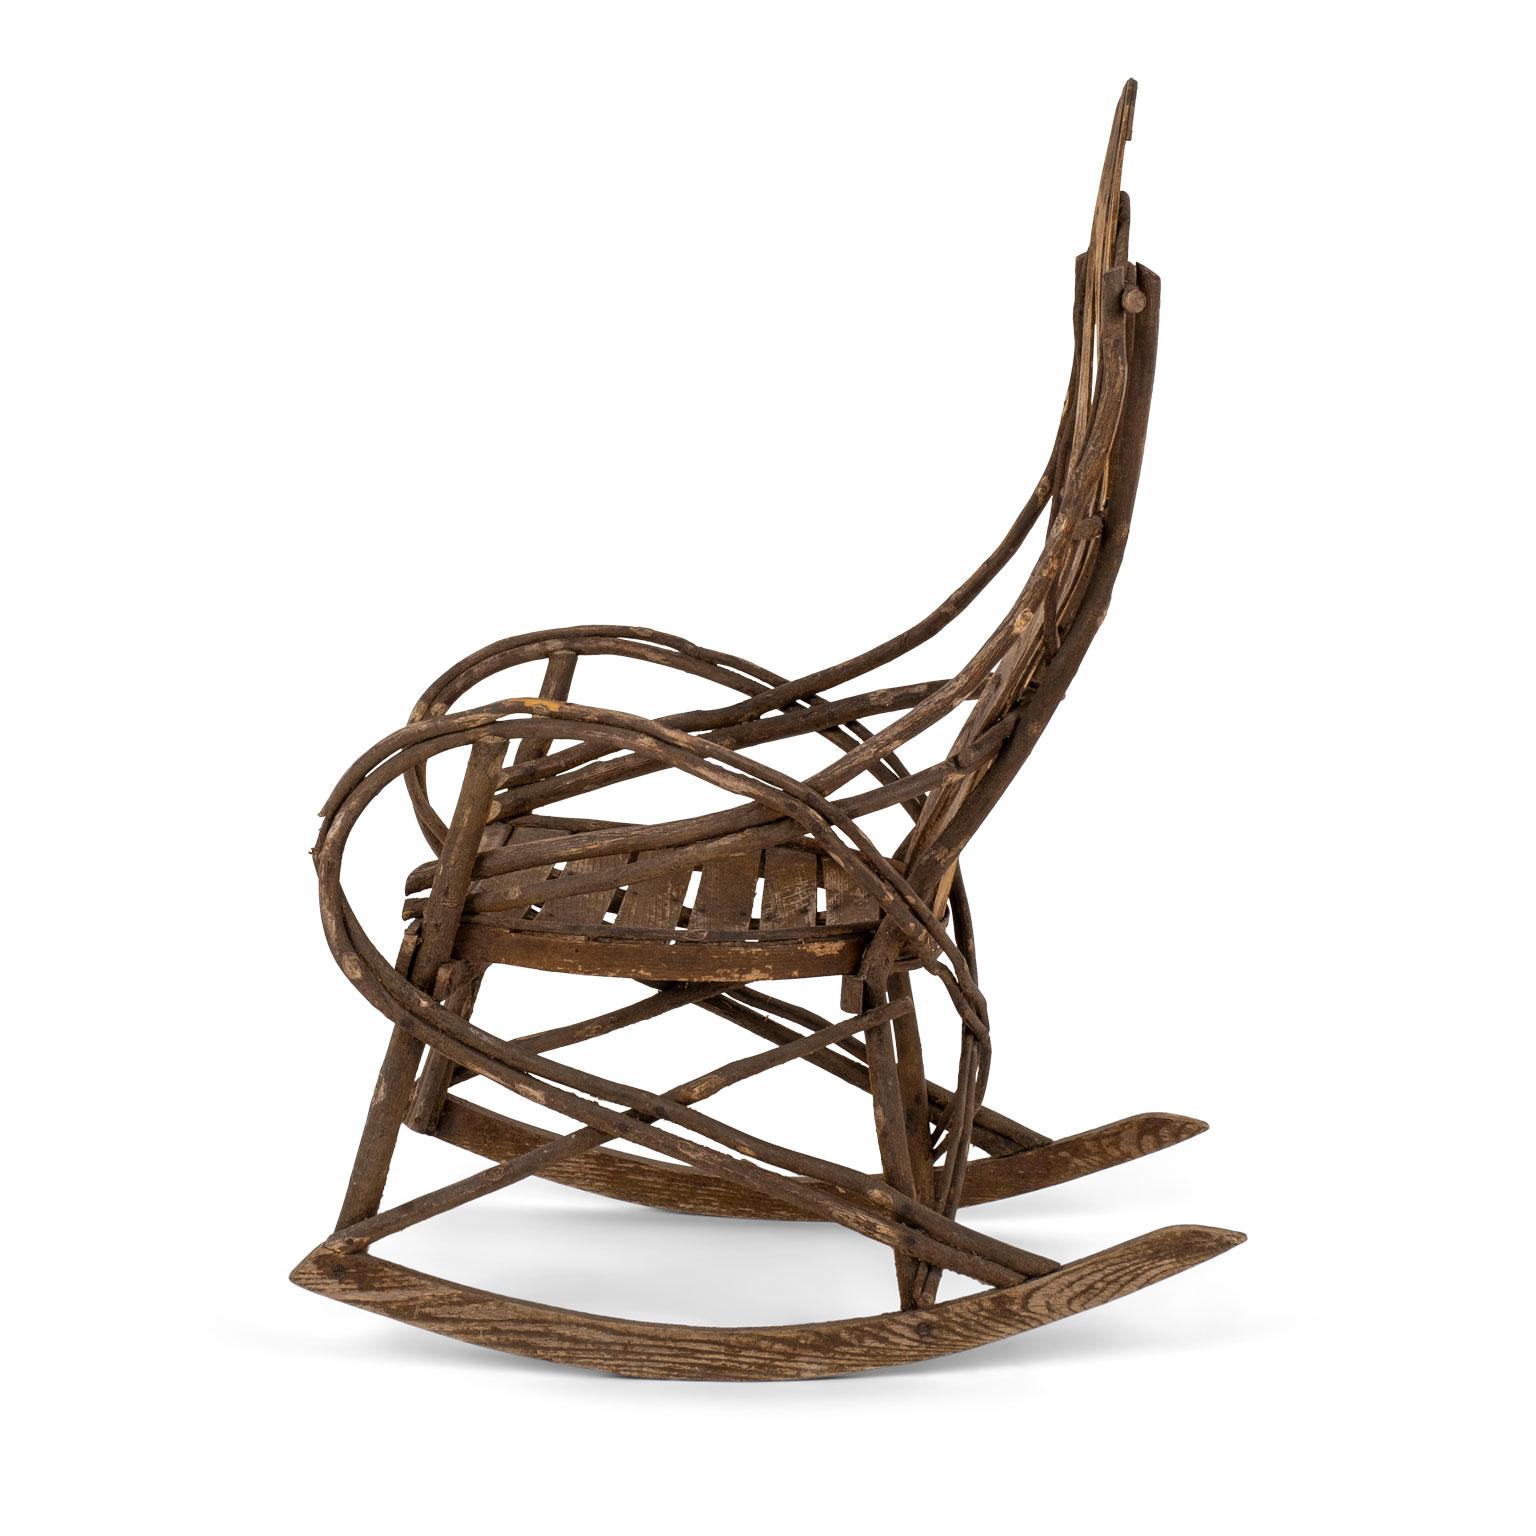 19th century Appalachian rocking chair constructed from twigs, bentwood and an oak seat. Faint remnants of old paint. Excellent condition and beautiful natural patina.